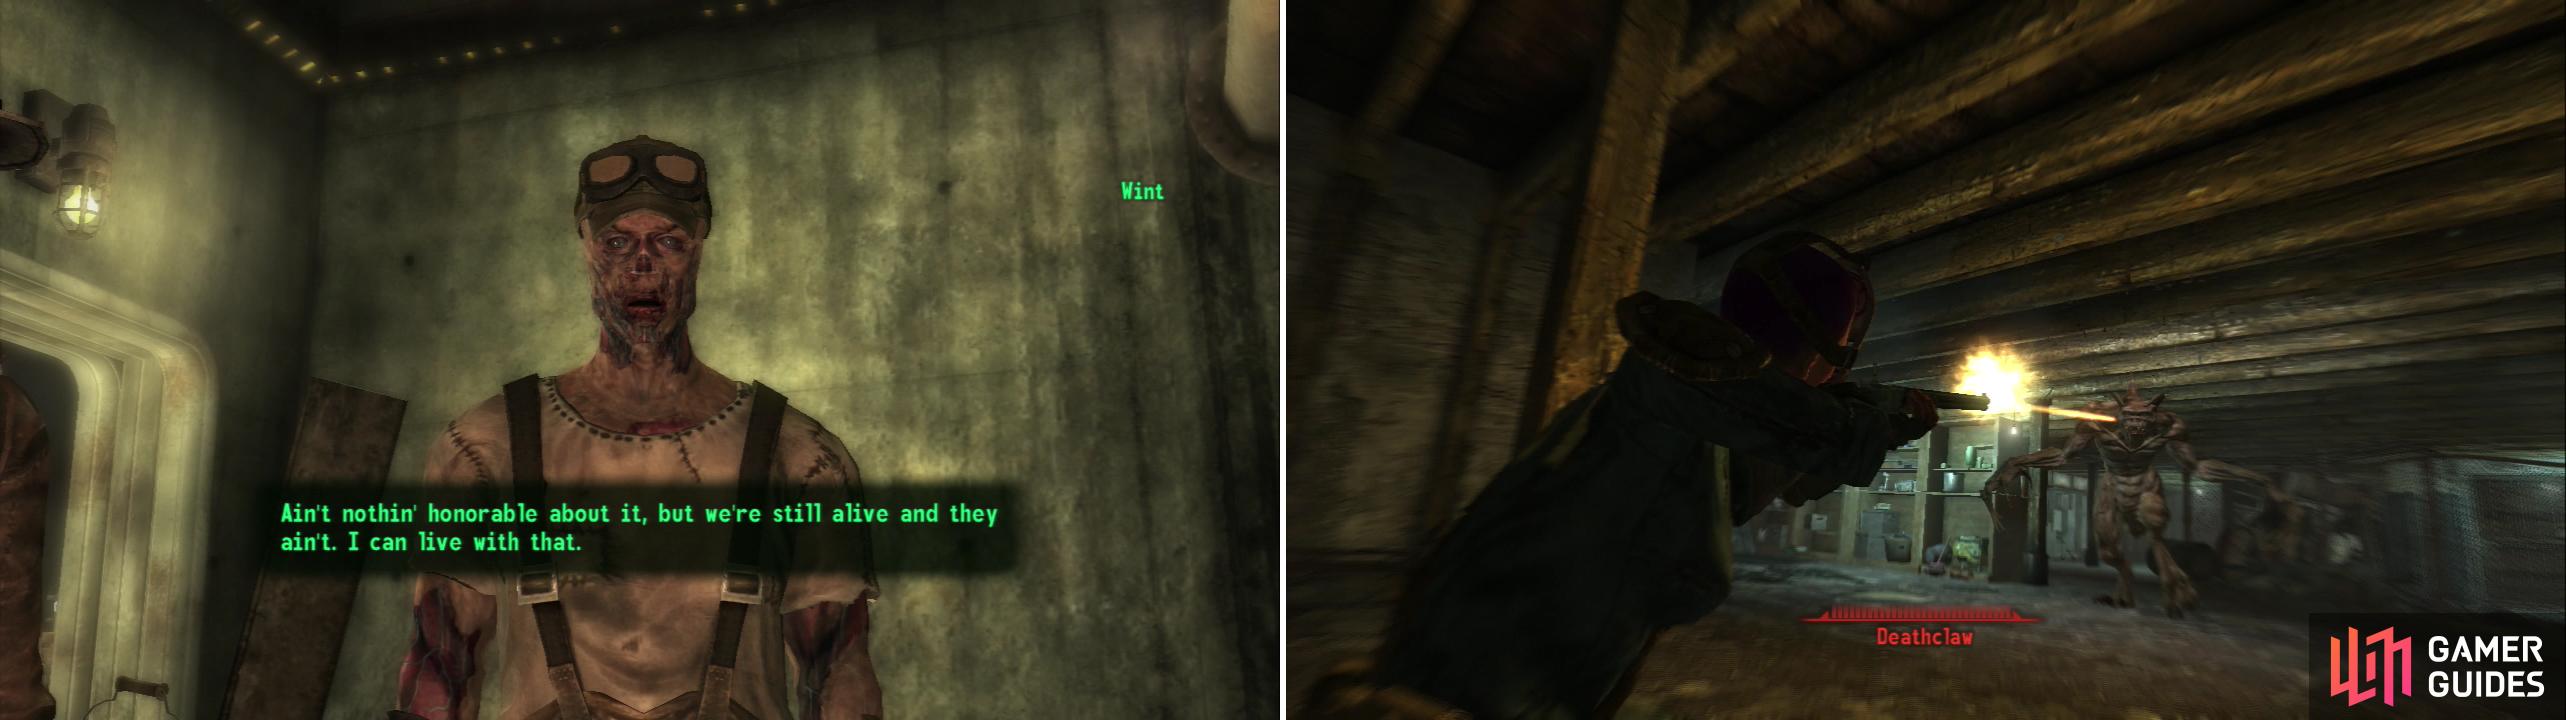 Wint is one of the few survivors of a team of Ghouls that foolishly tried to plunder Old Olney Underground (left). Deathclaws prowl around-sneak attack criticals are your friend (right).